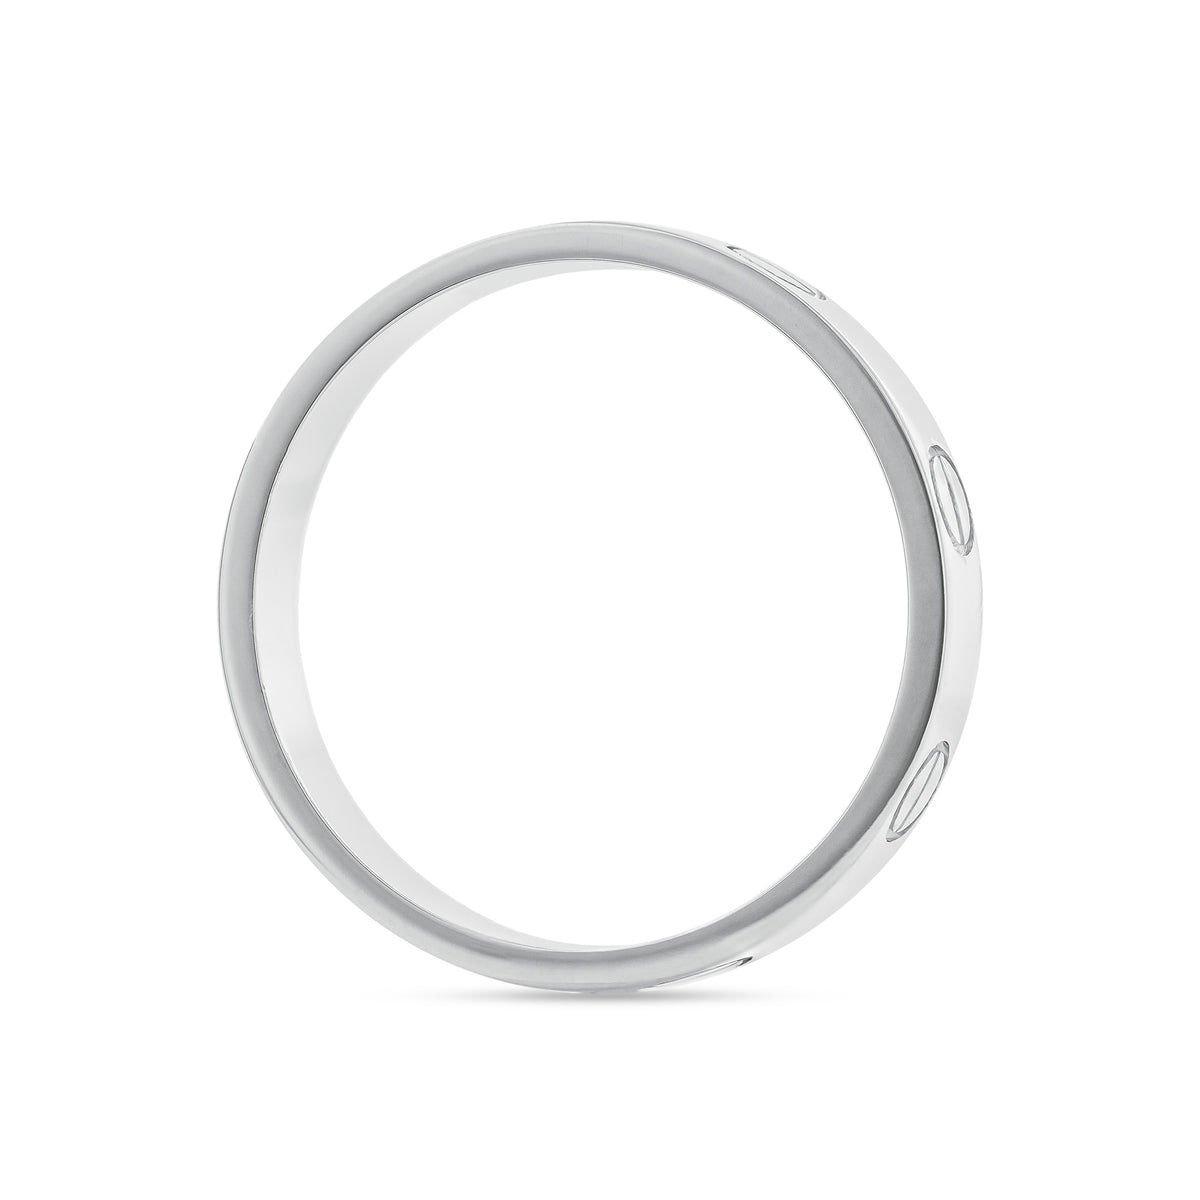 Cartier 18ct White Gold Thin Plain Love Ring - Size 53